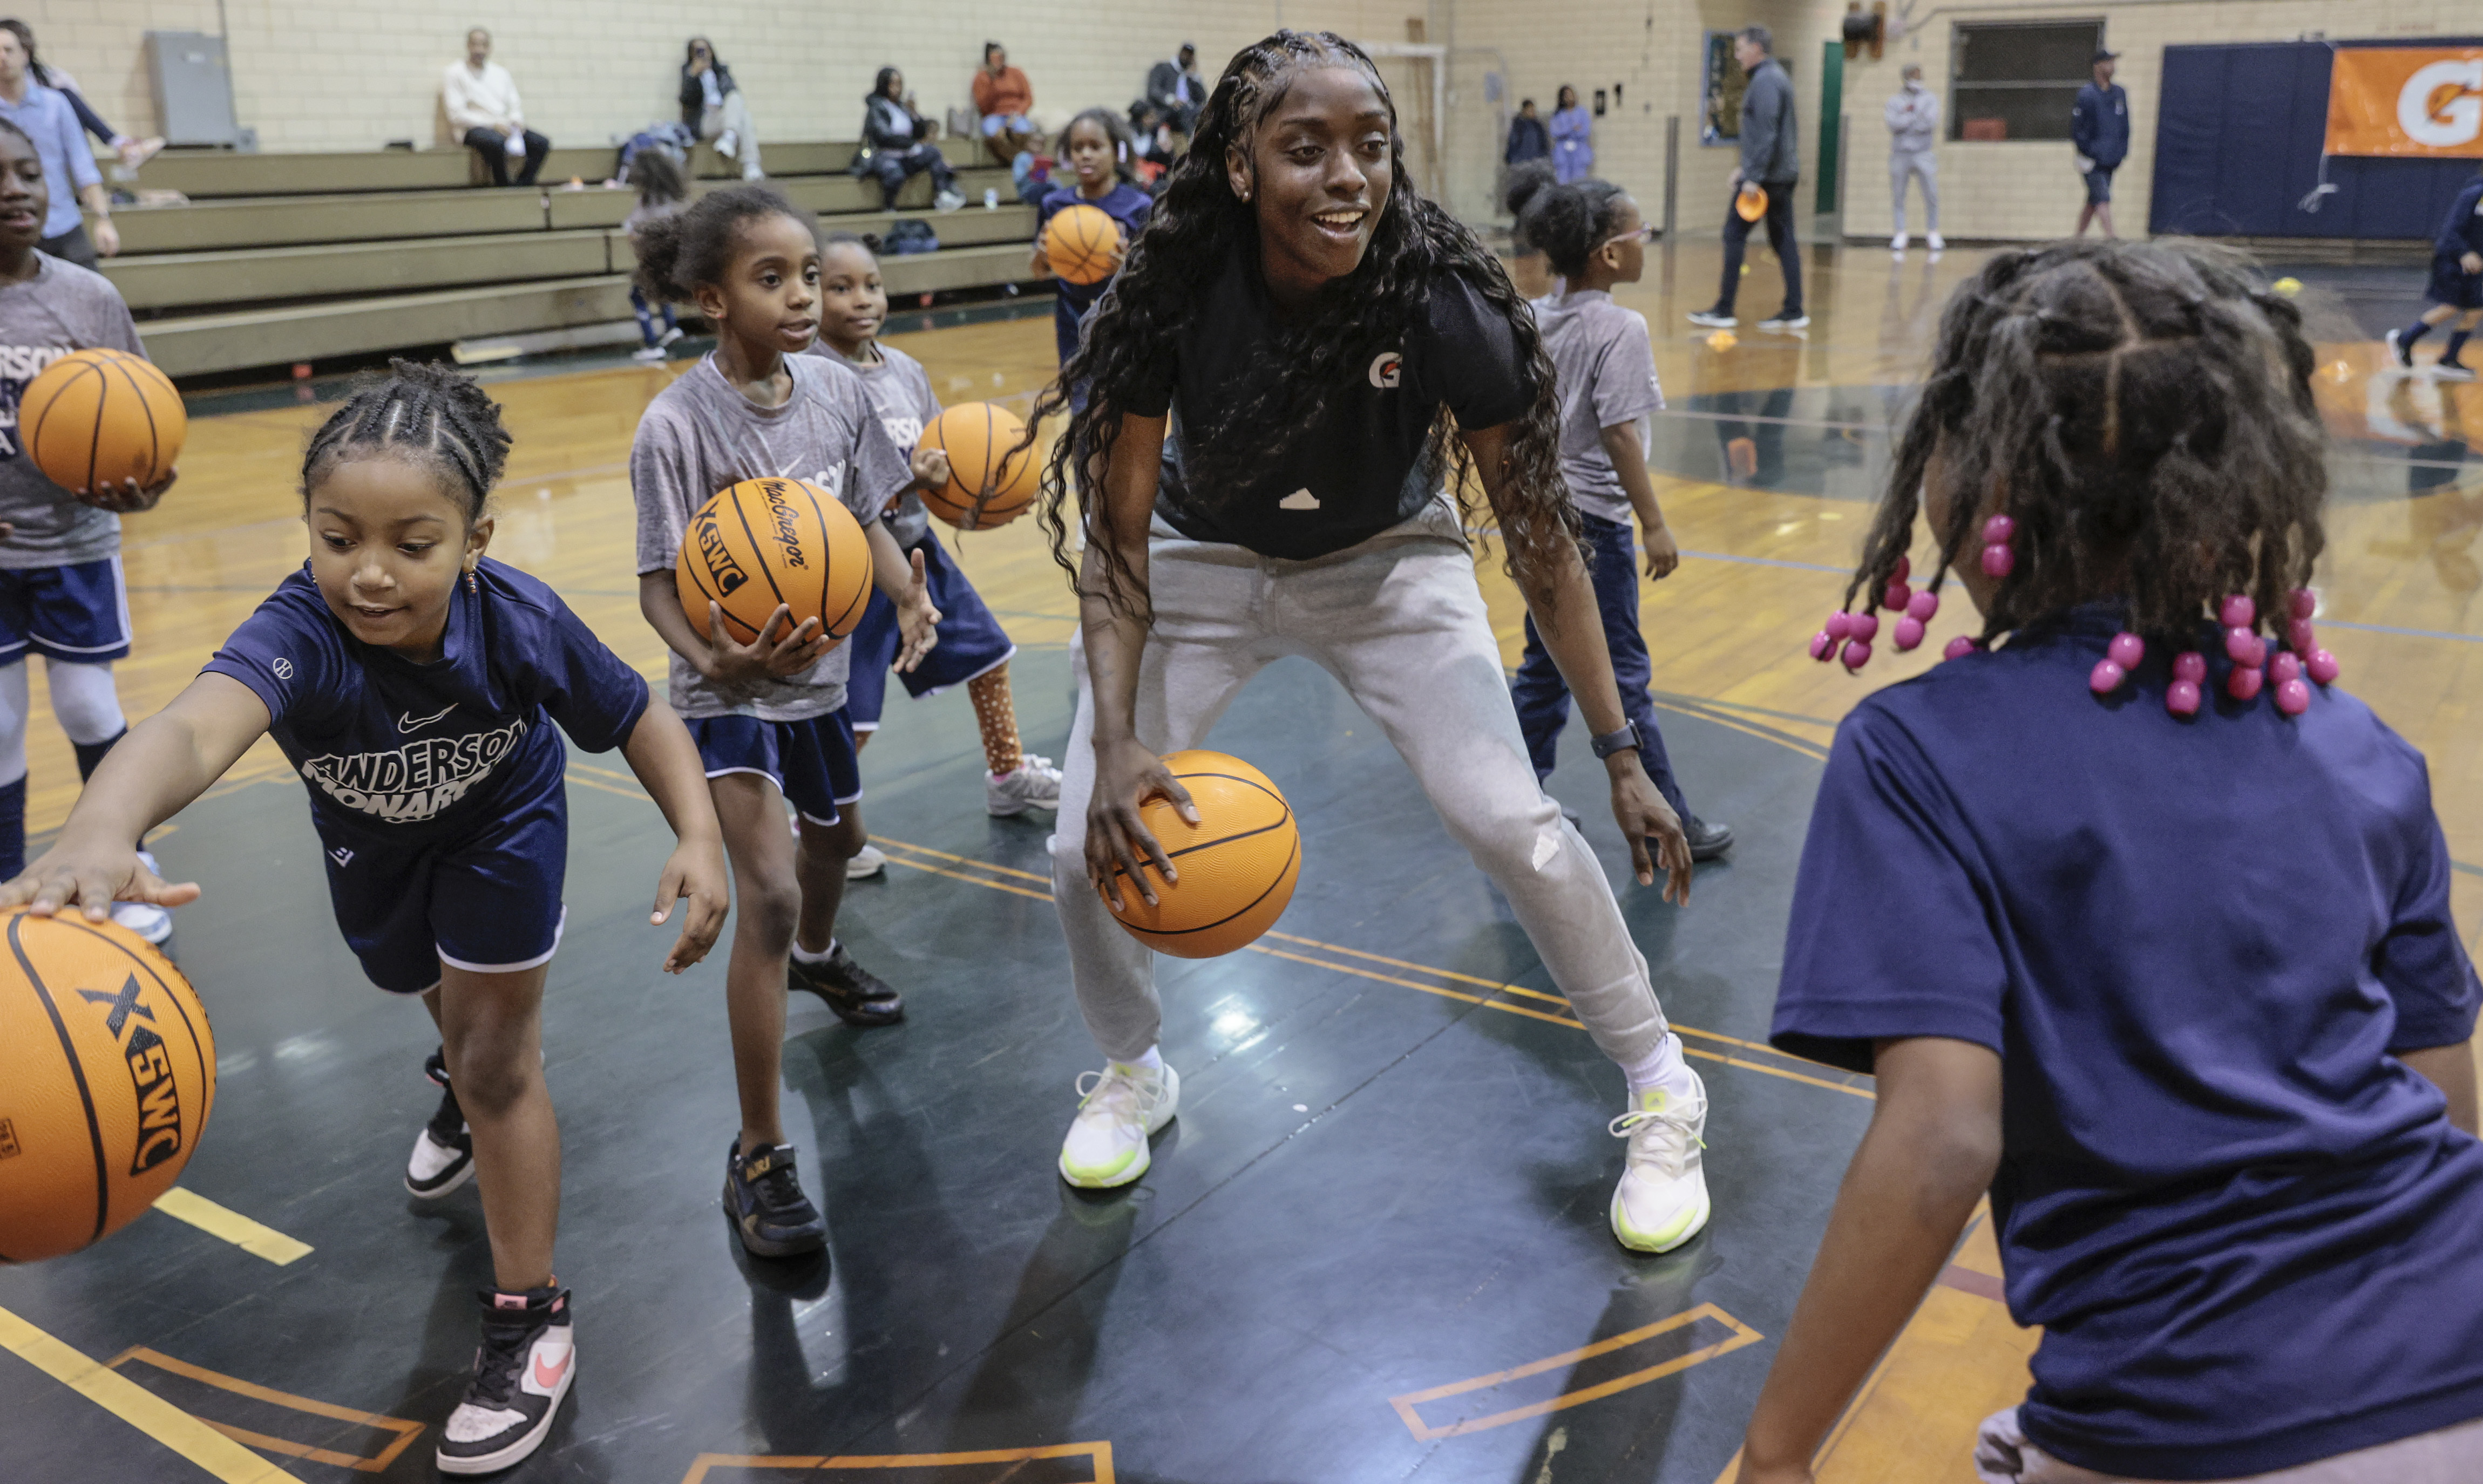 WNBA star Copper supports Anderson Monarchs - South Philly Review